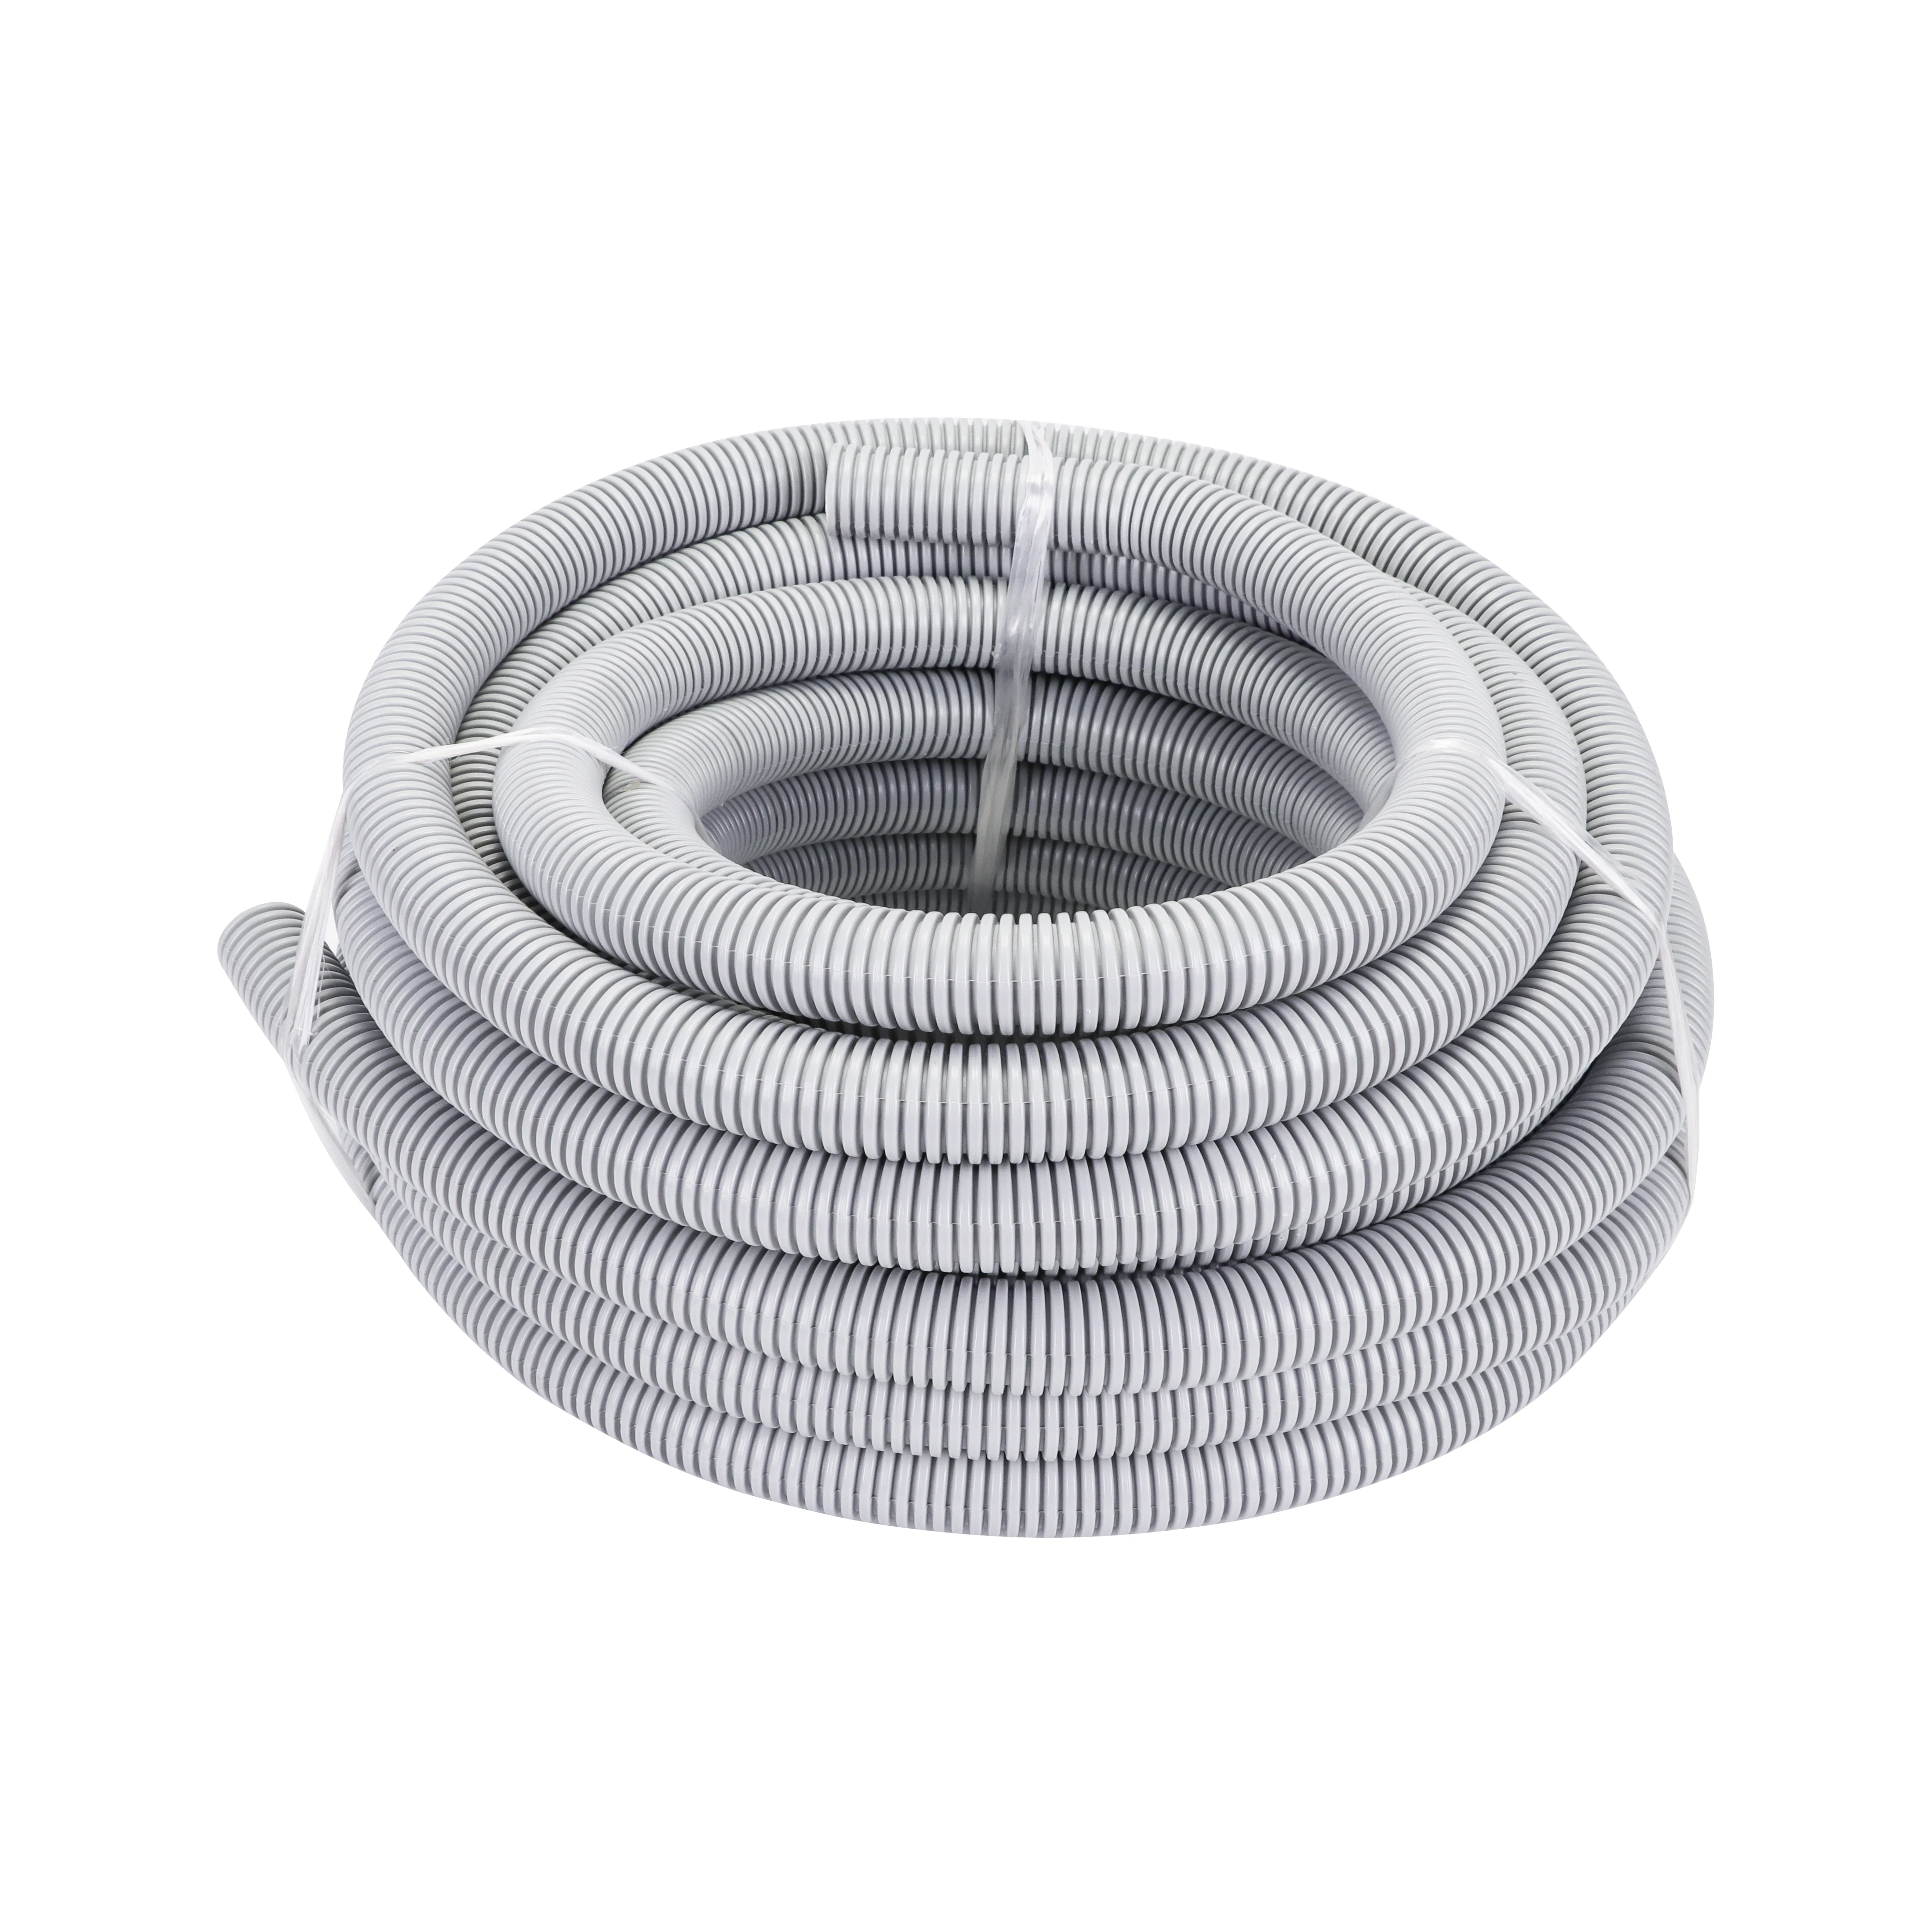 10 M with Adapters 25mm Economy Polypropylene Flexible Conduit